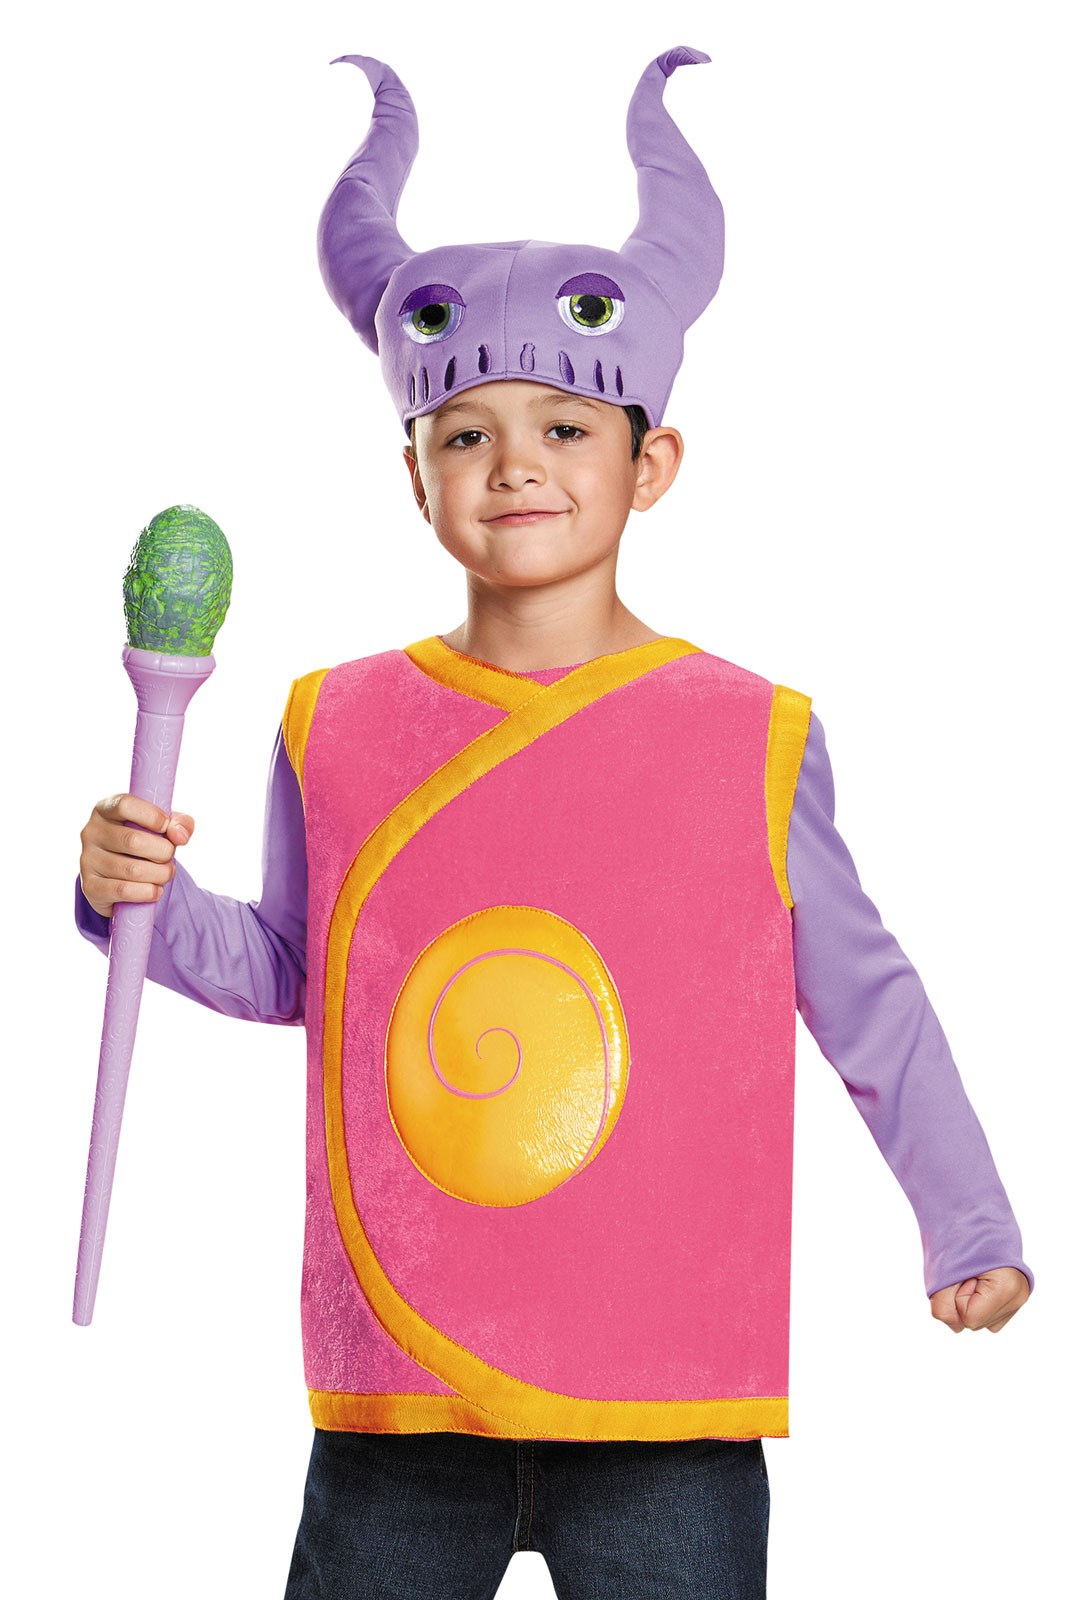 Dreamworks Home: Captain Smek Deluxe Costume For Toddlers